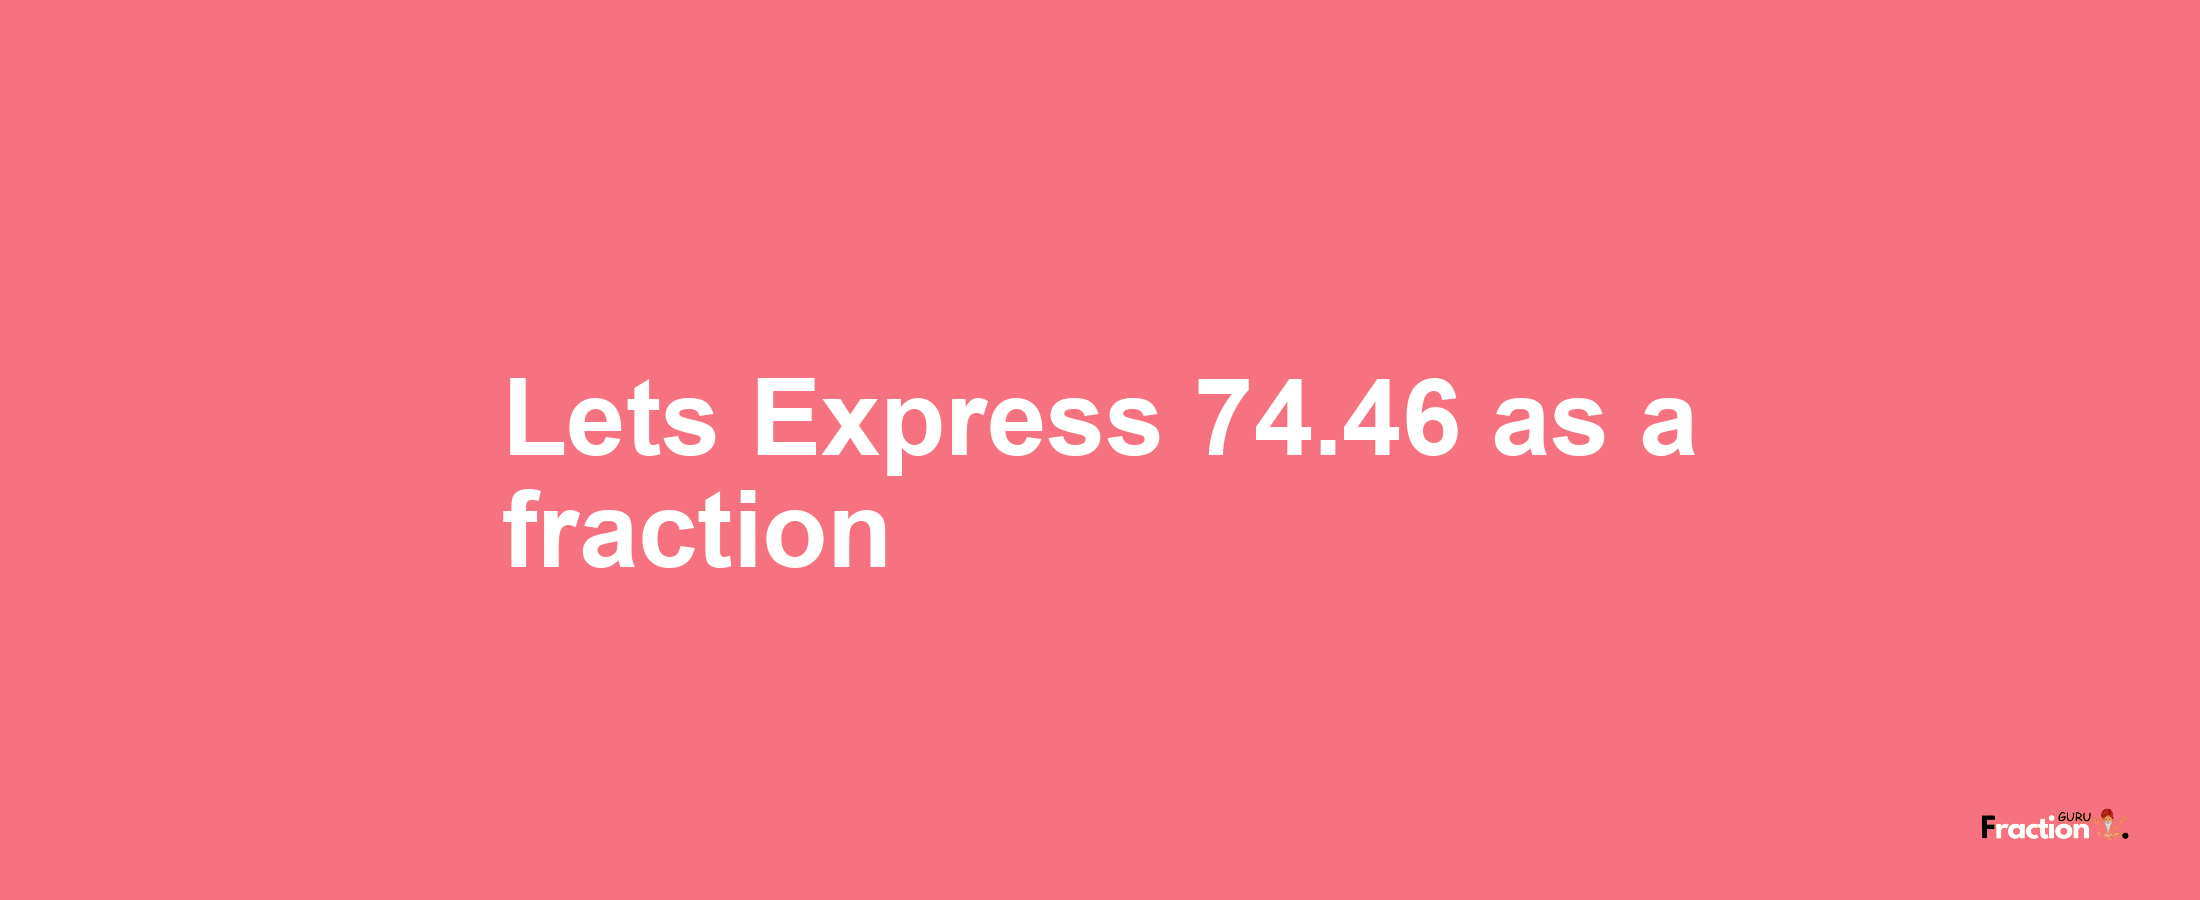 Lets Express 74.46 as afraction